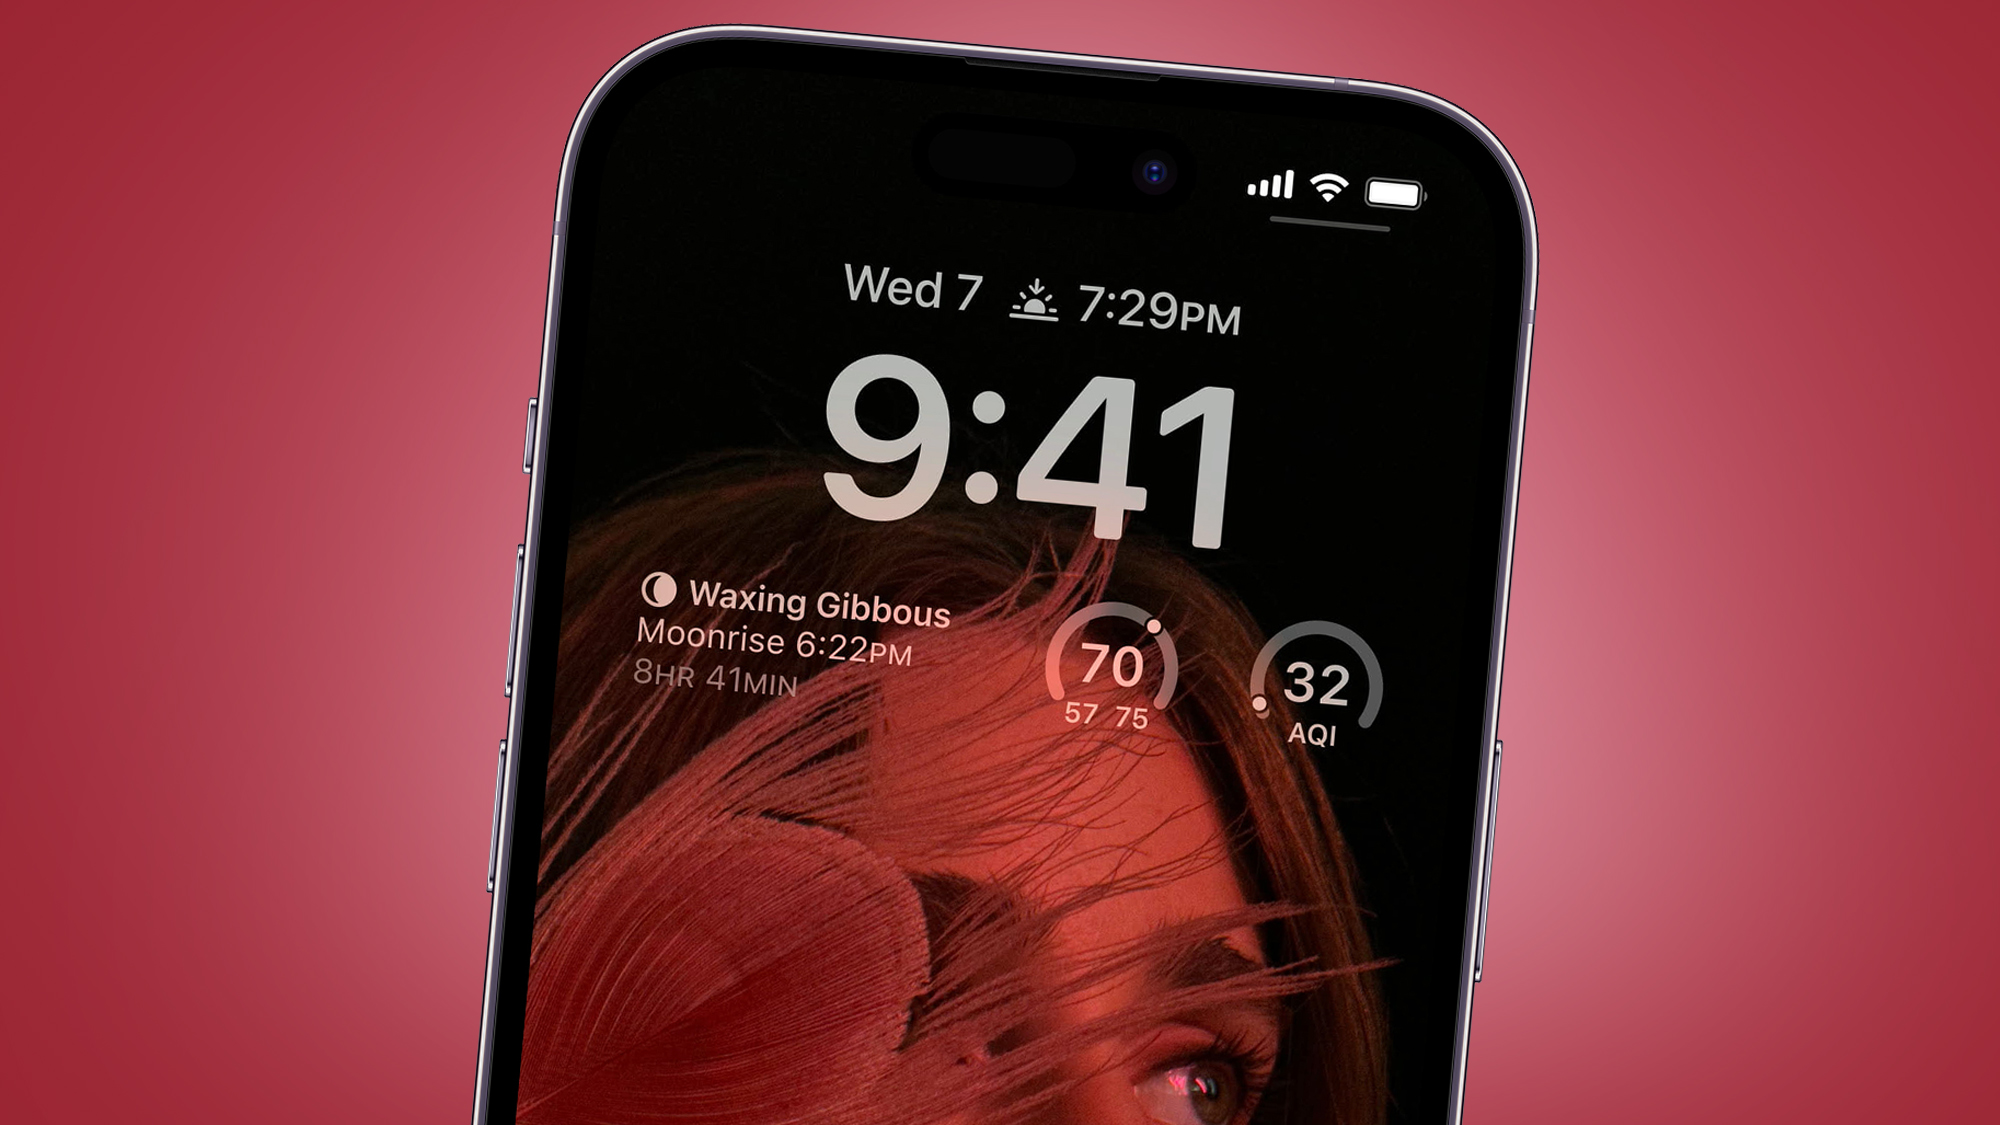 iPhone on a red background